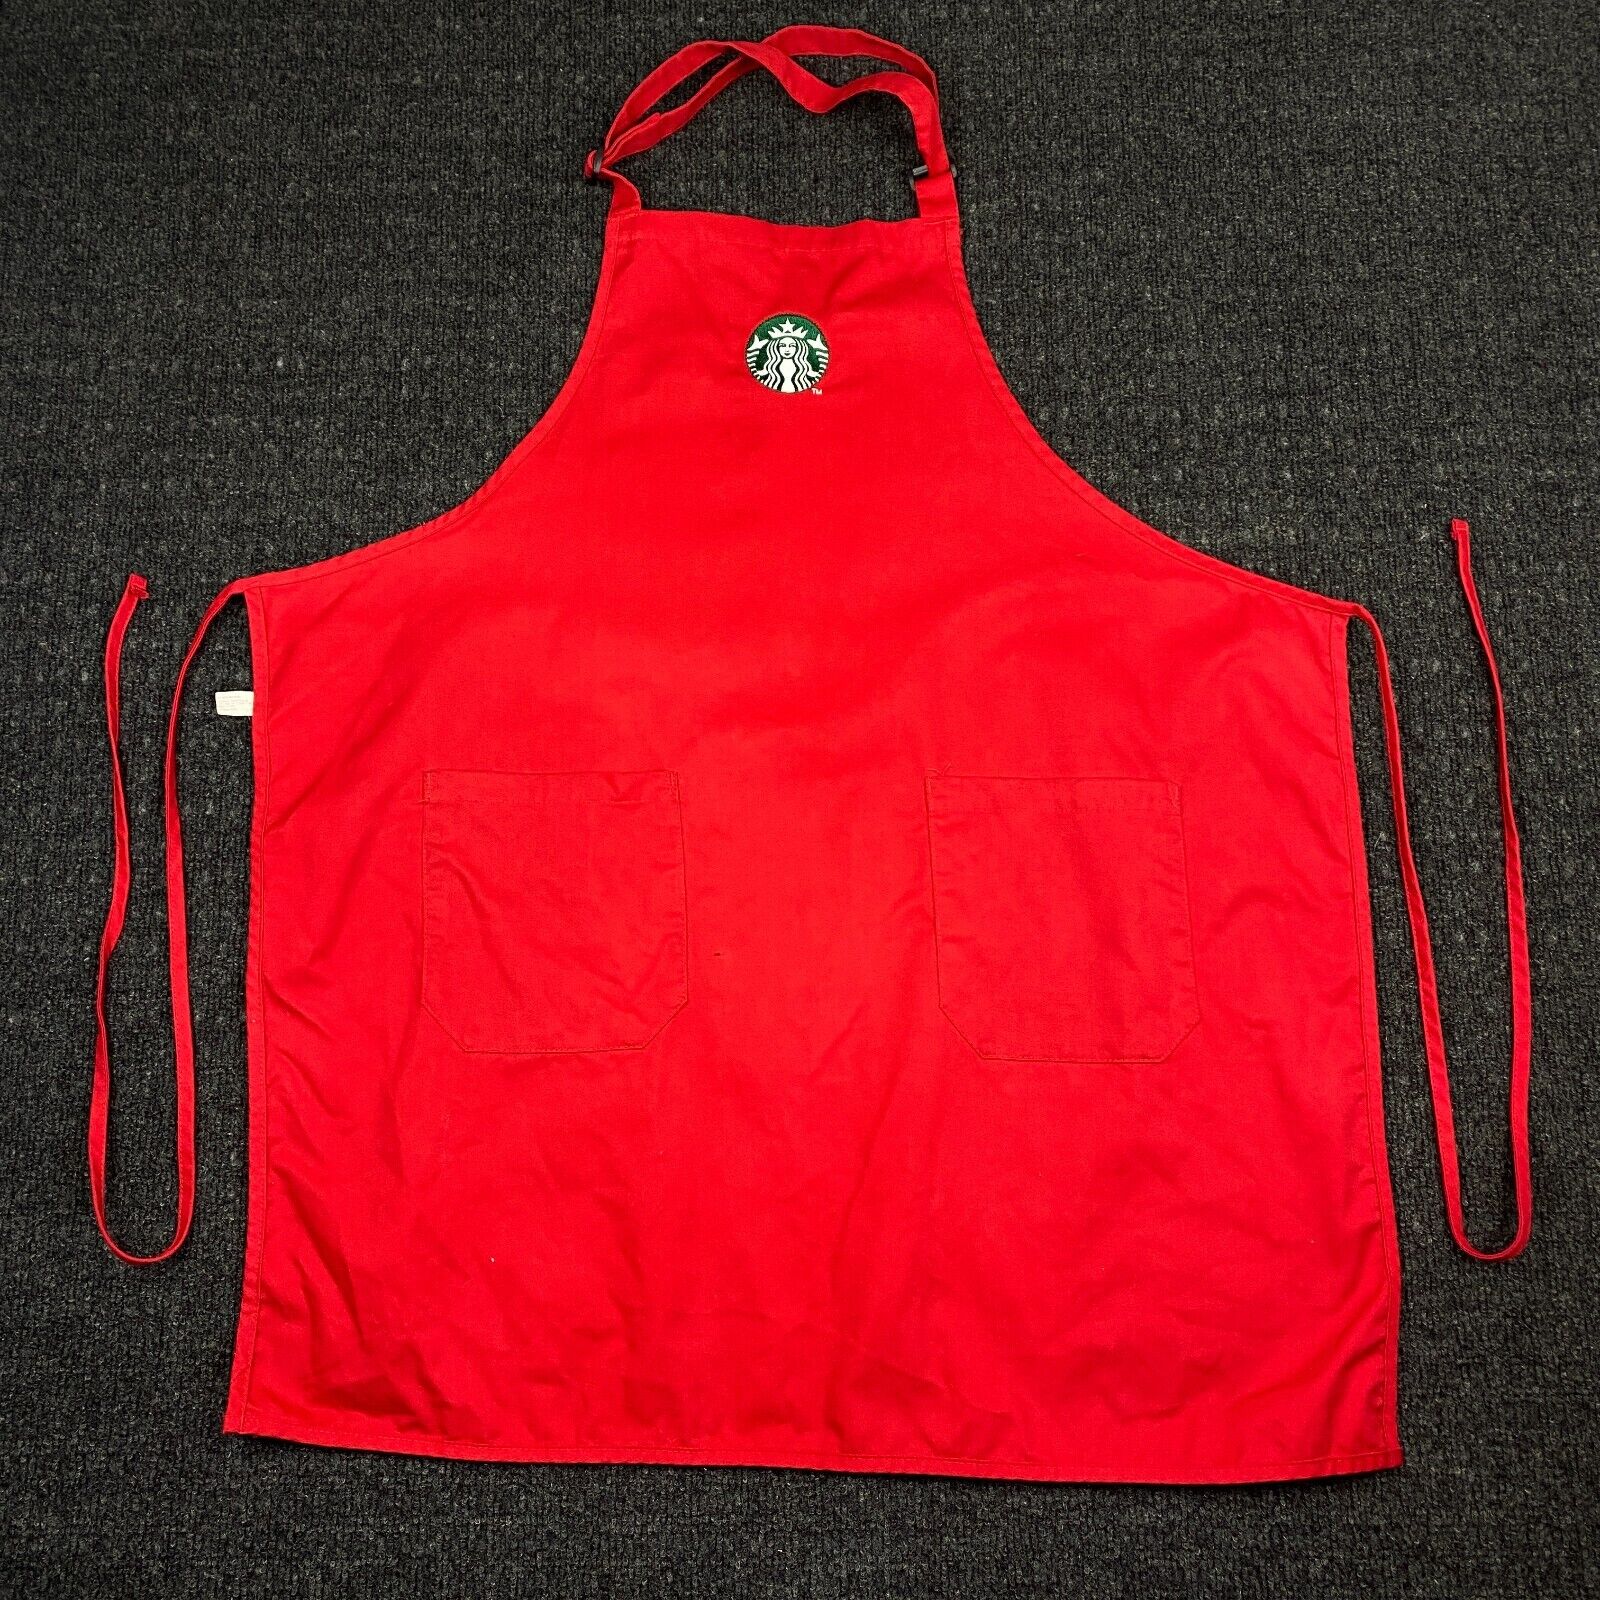 Official Starbucks Employee Uniform Barista Apron Red FAST SHIPPING